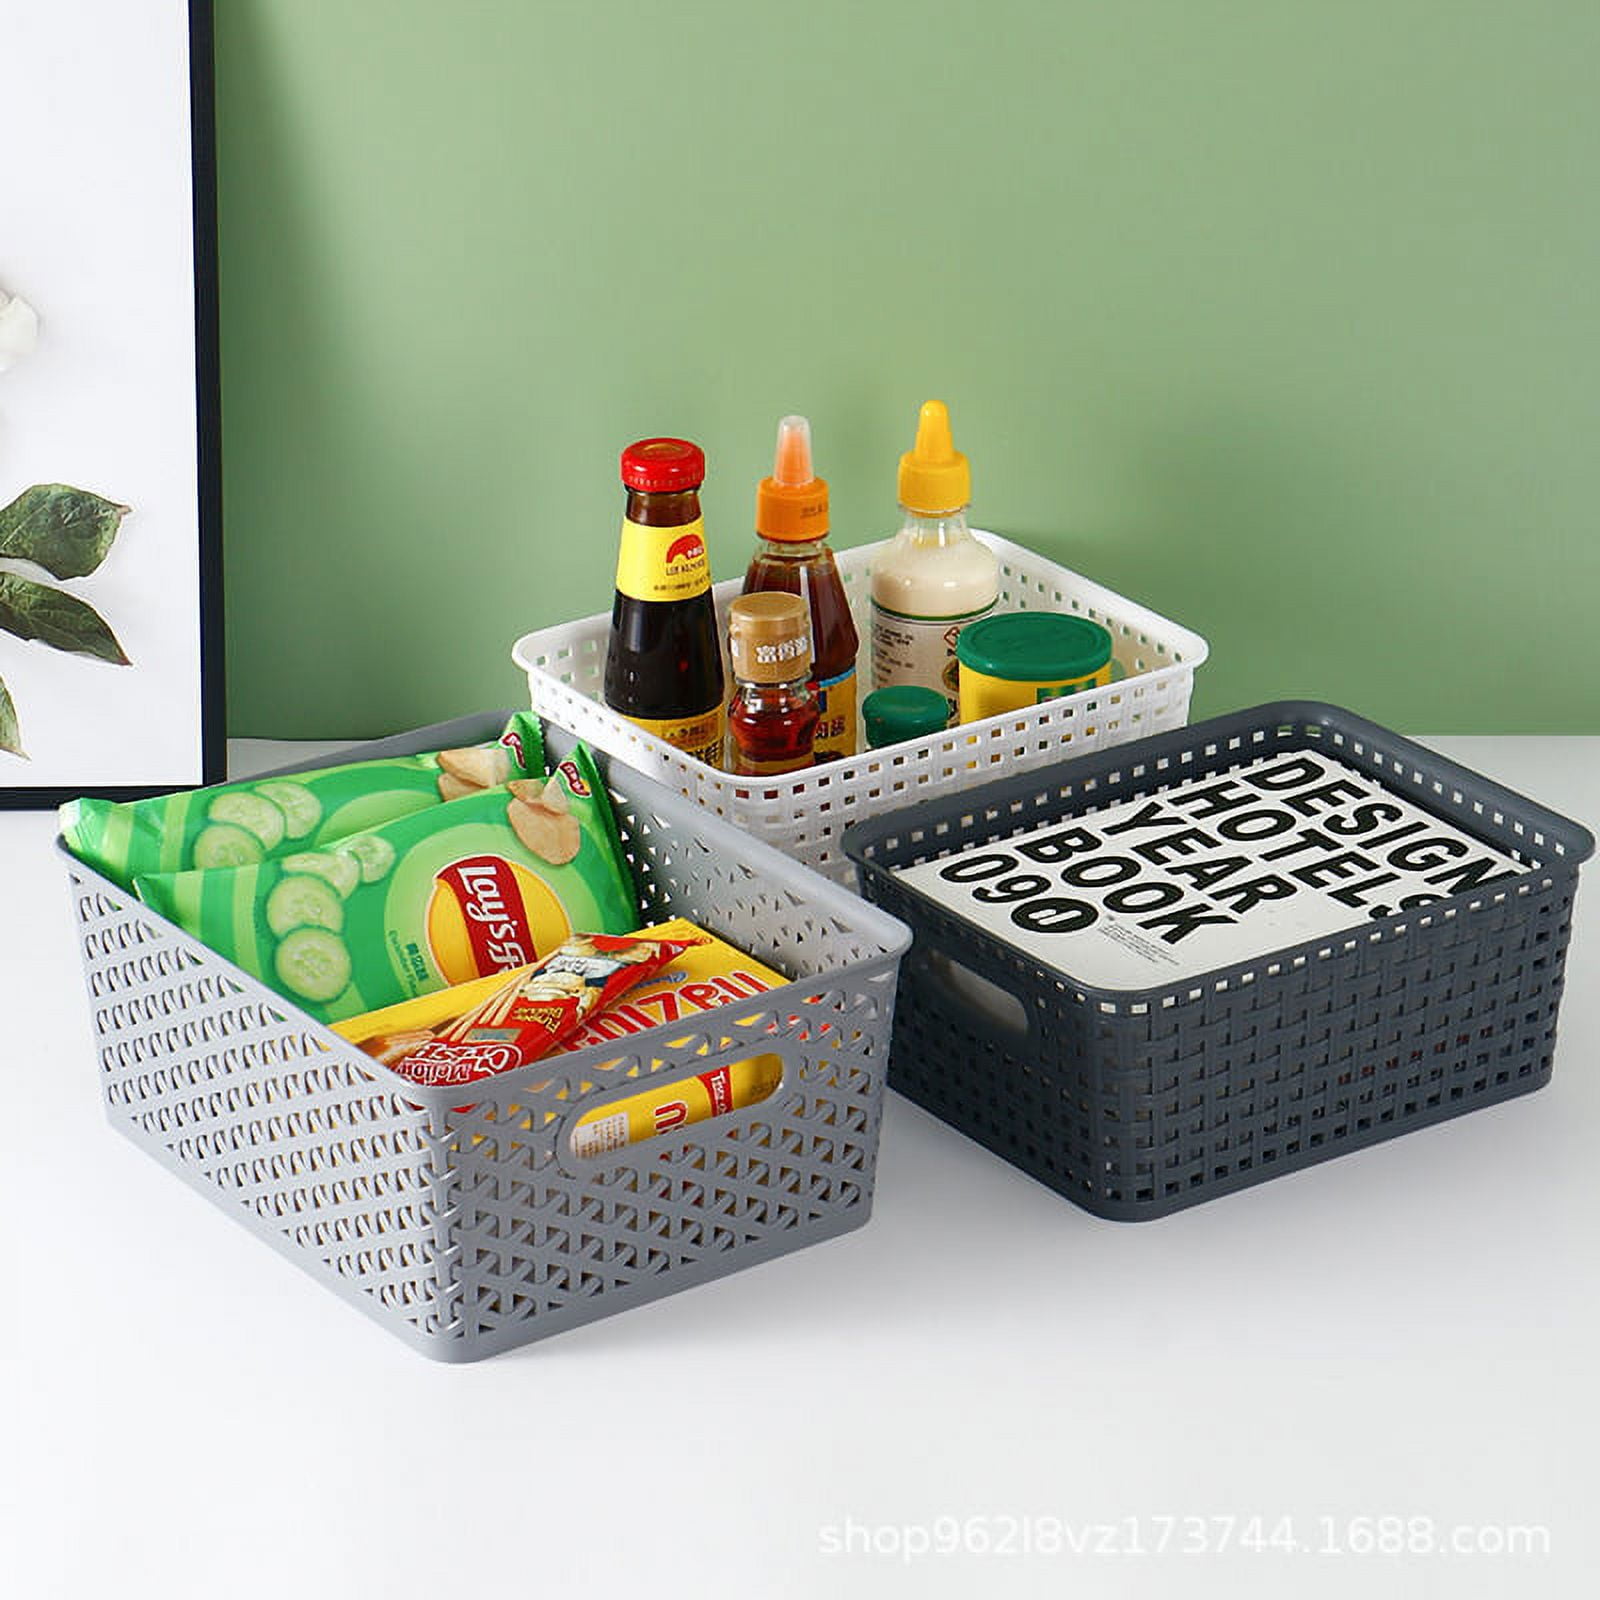 NETANY Plastic Storage Baskets - 8 Pack, Gray, Durable, Easy to Use,  Flexible, Multi-Purpose, Ideal for Closets, Cabinets, Shelves, Countertops